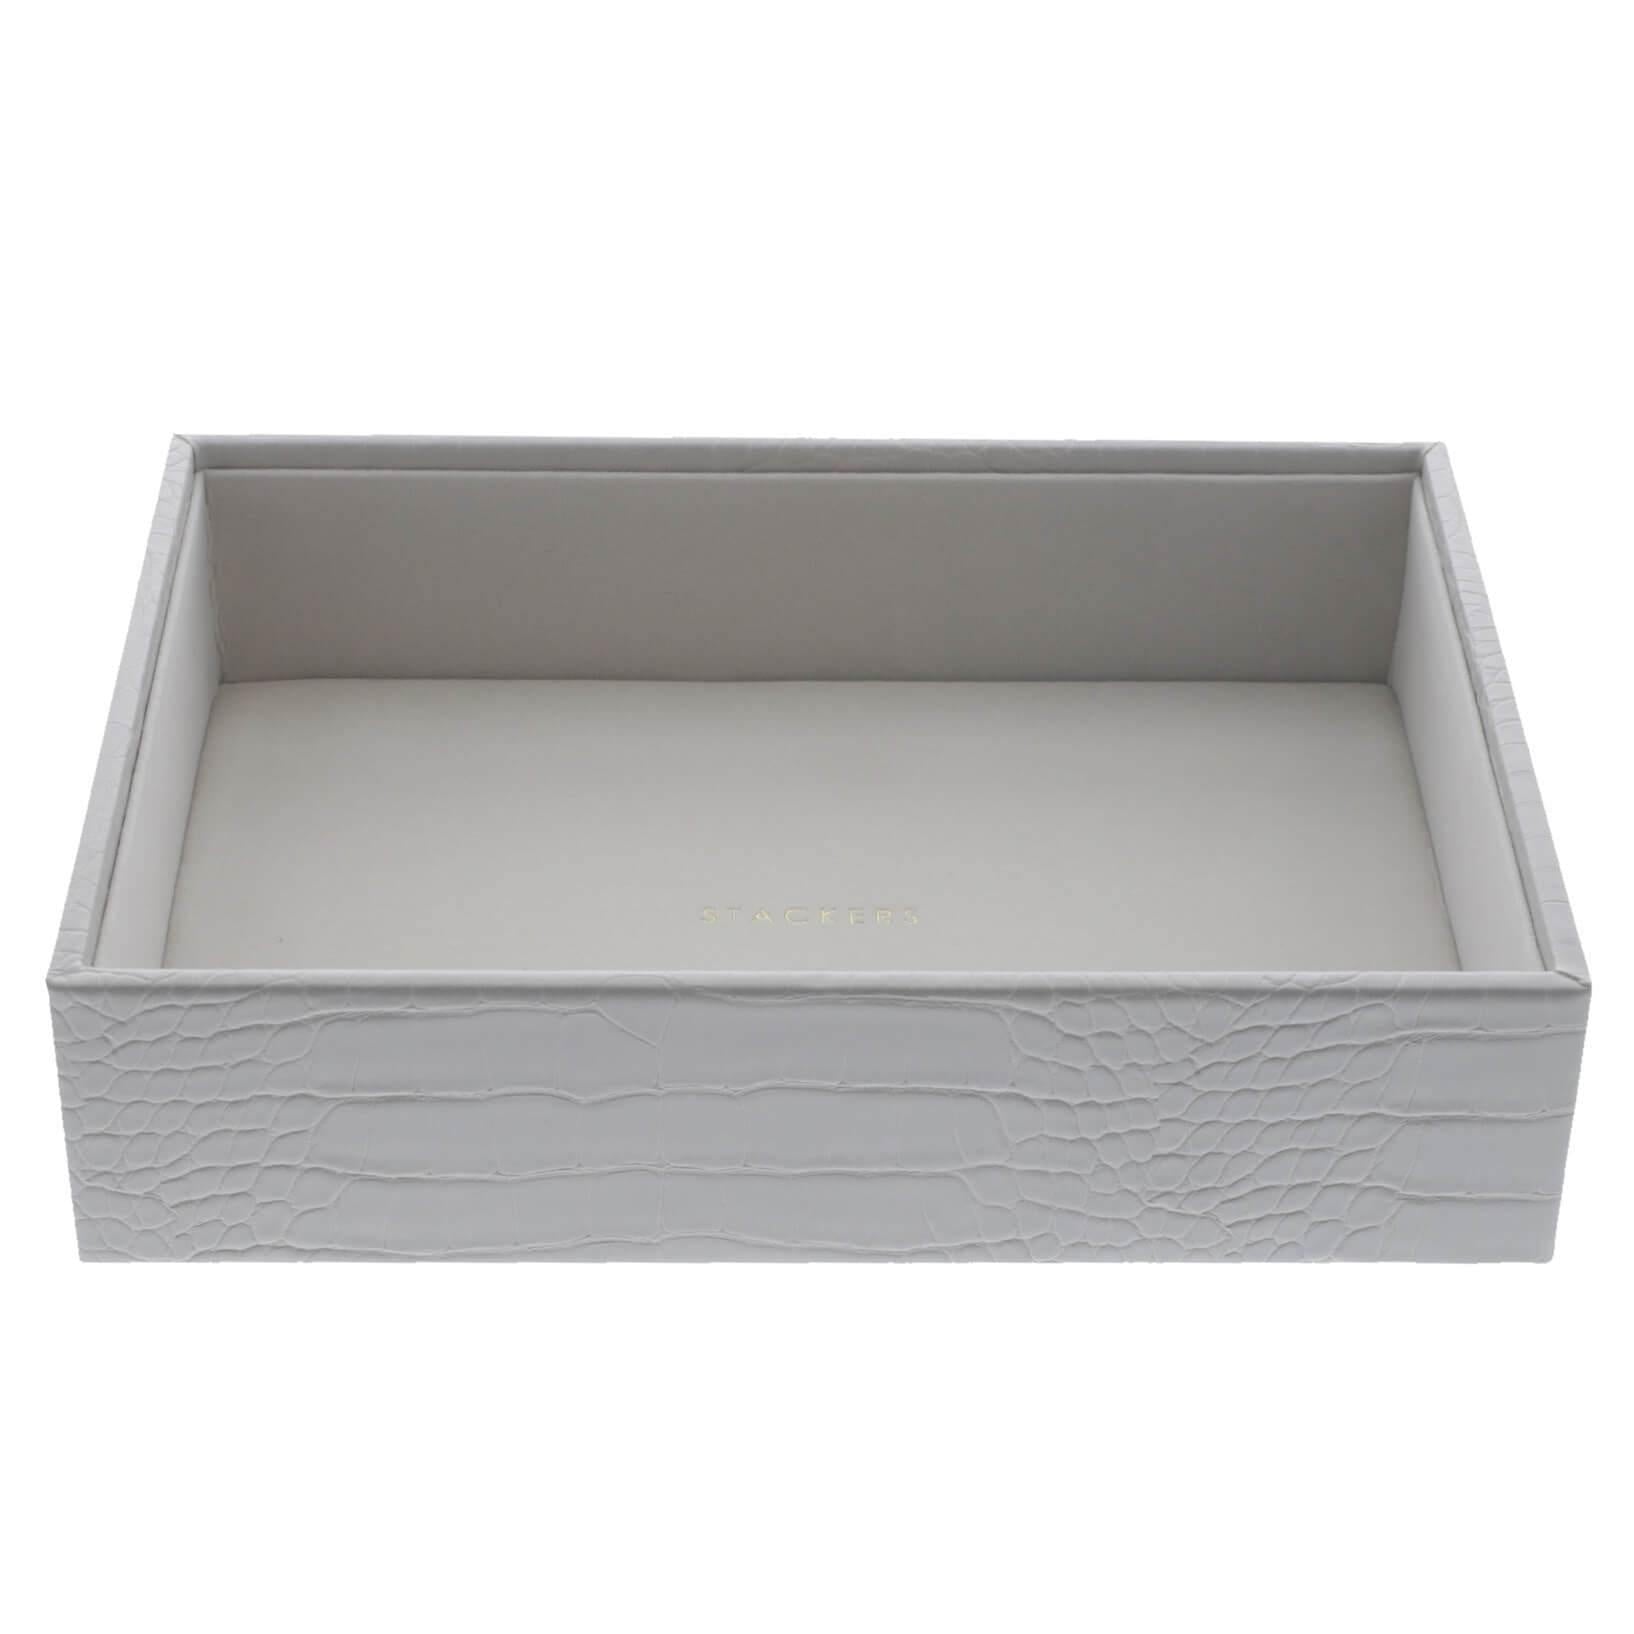 Putty Croc Classic Size Stackers Jewellery Box Deep compartment tray